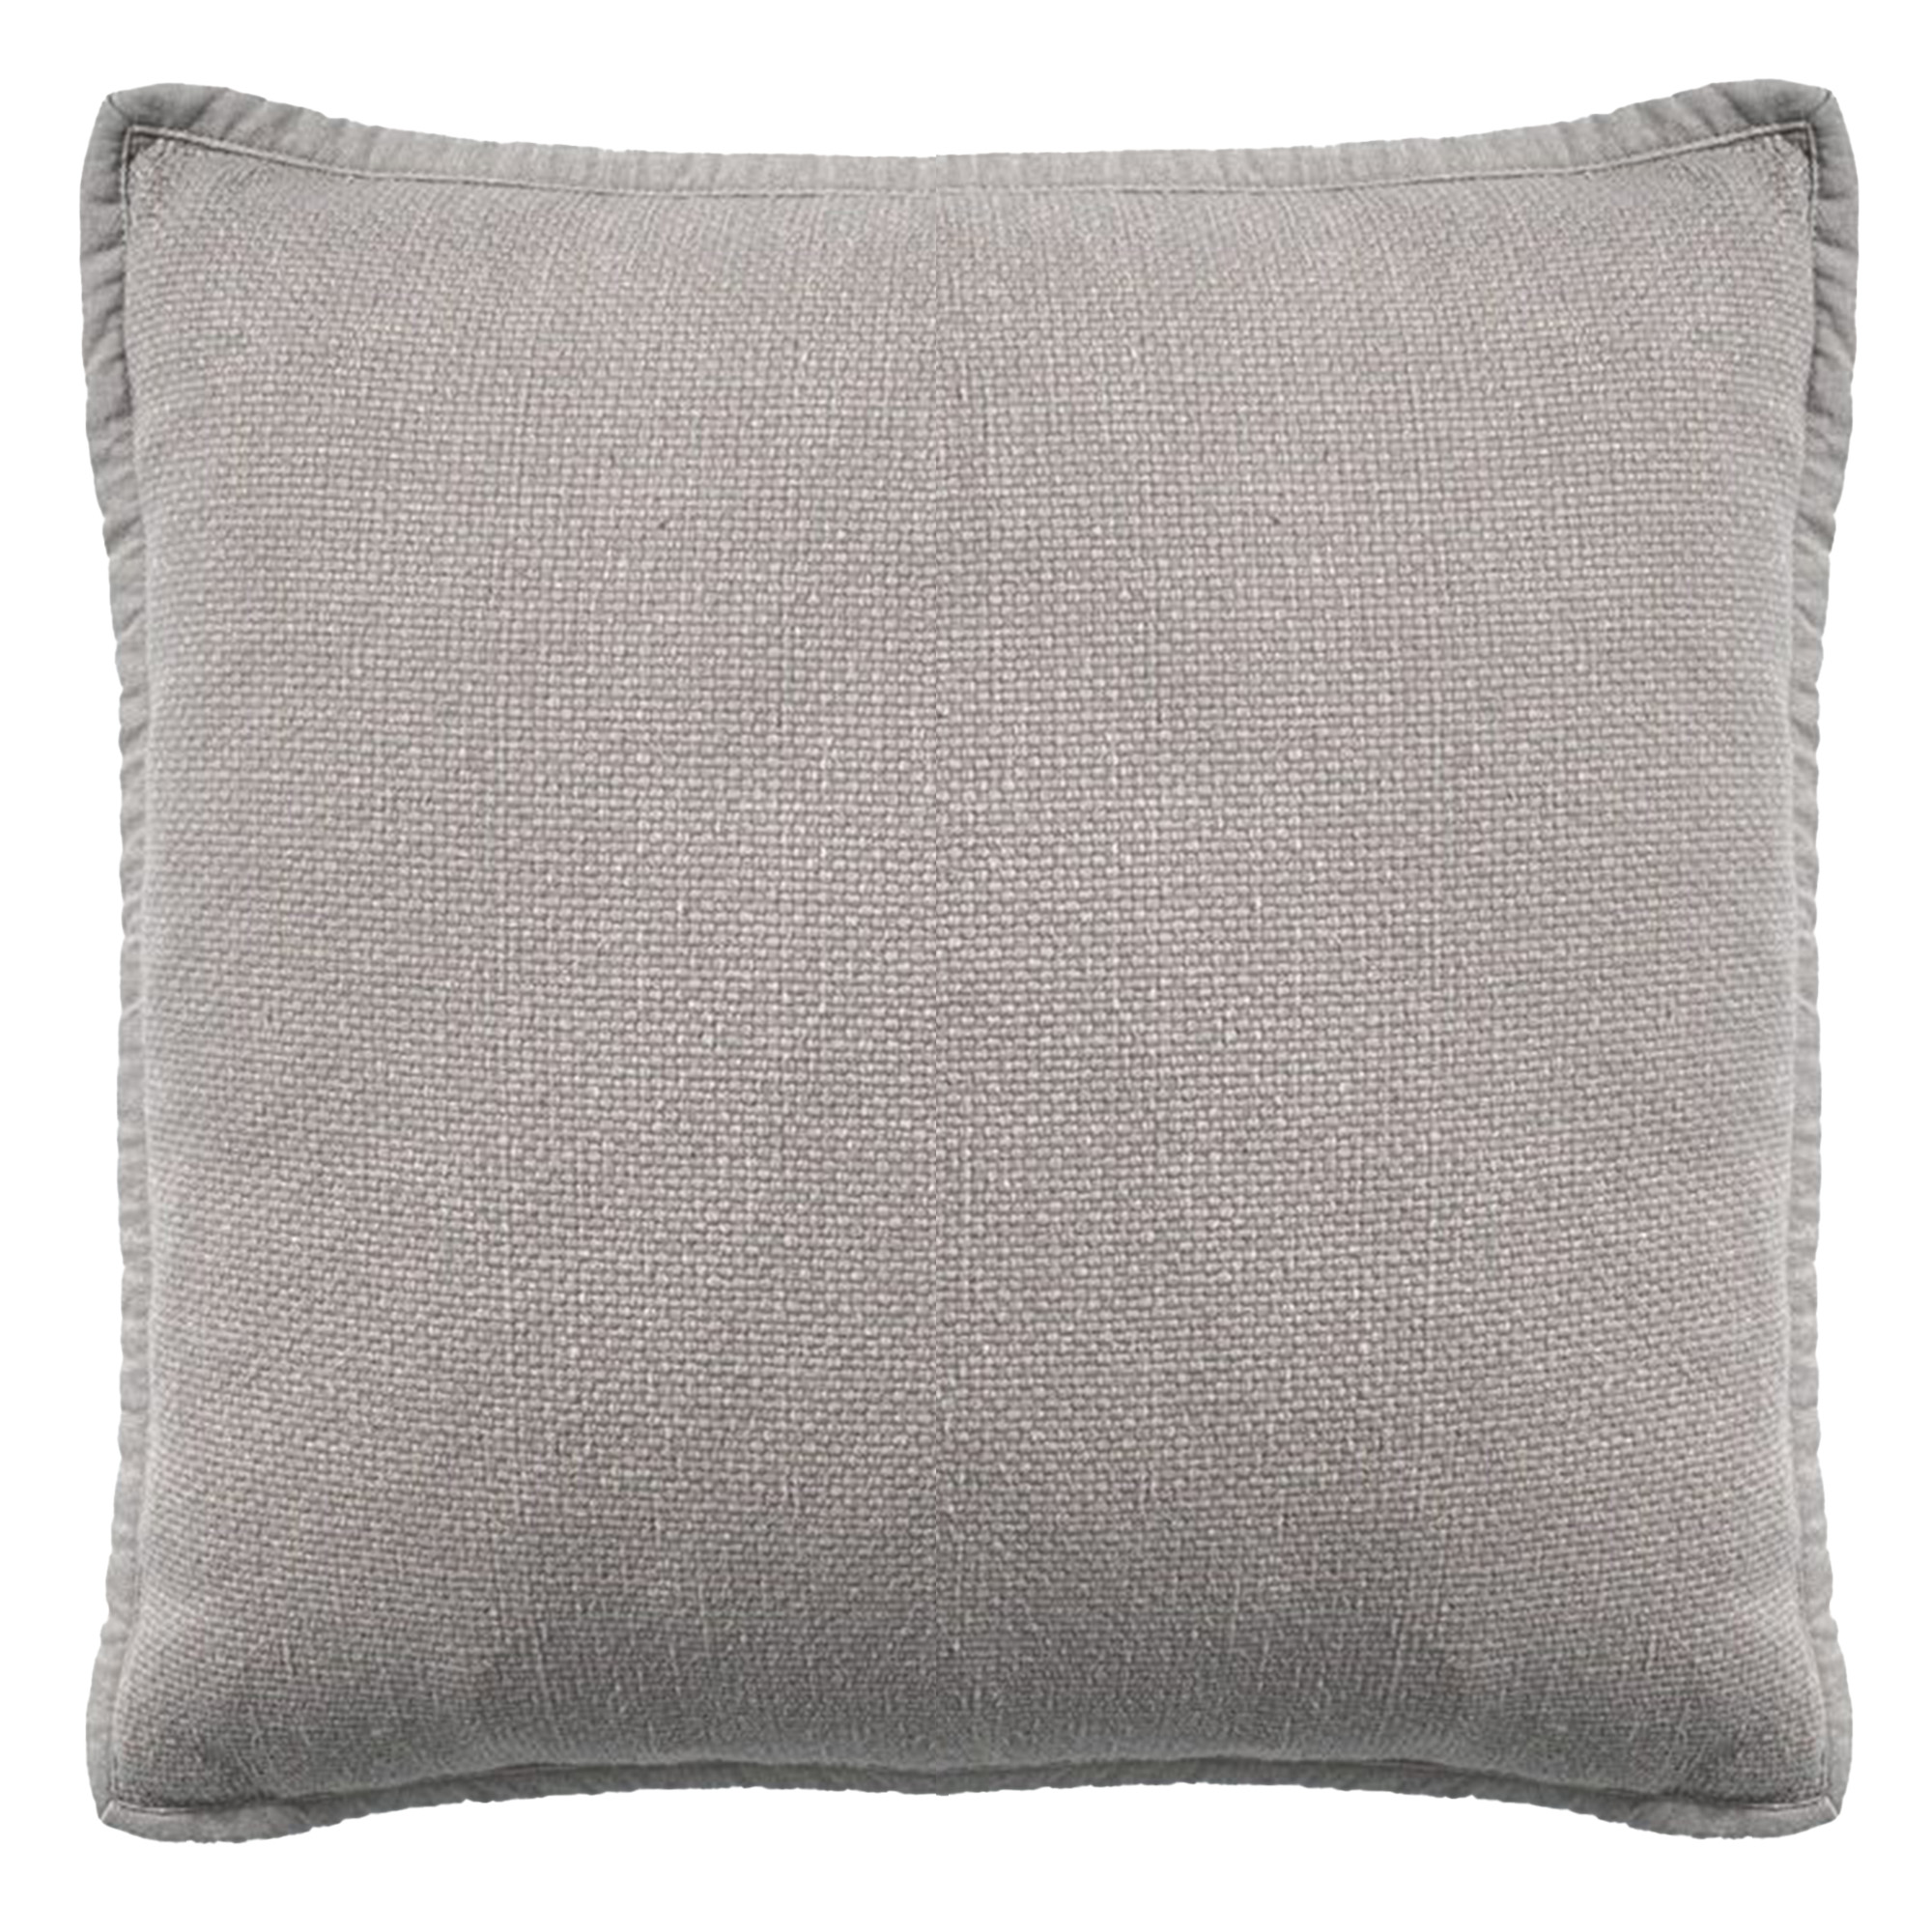 BOWIE - Cushion 45x45 cm - washed cotton - Driftwood - taupe